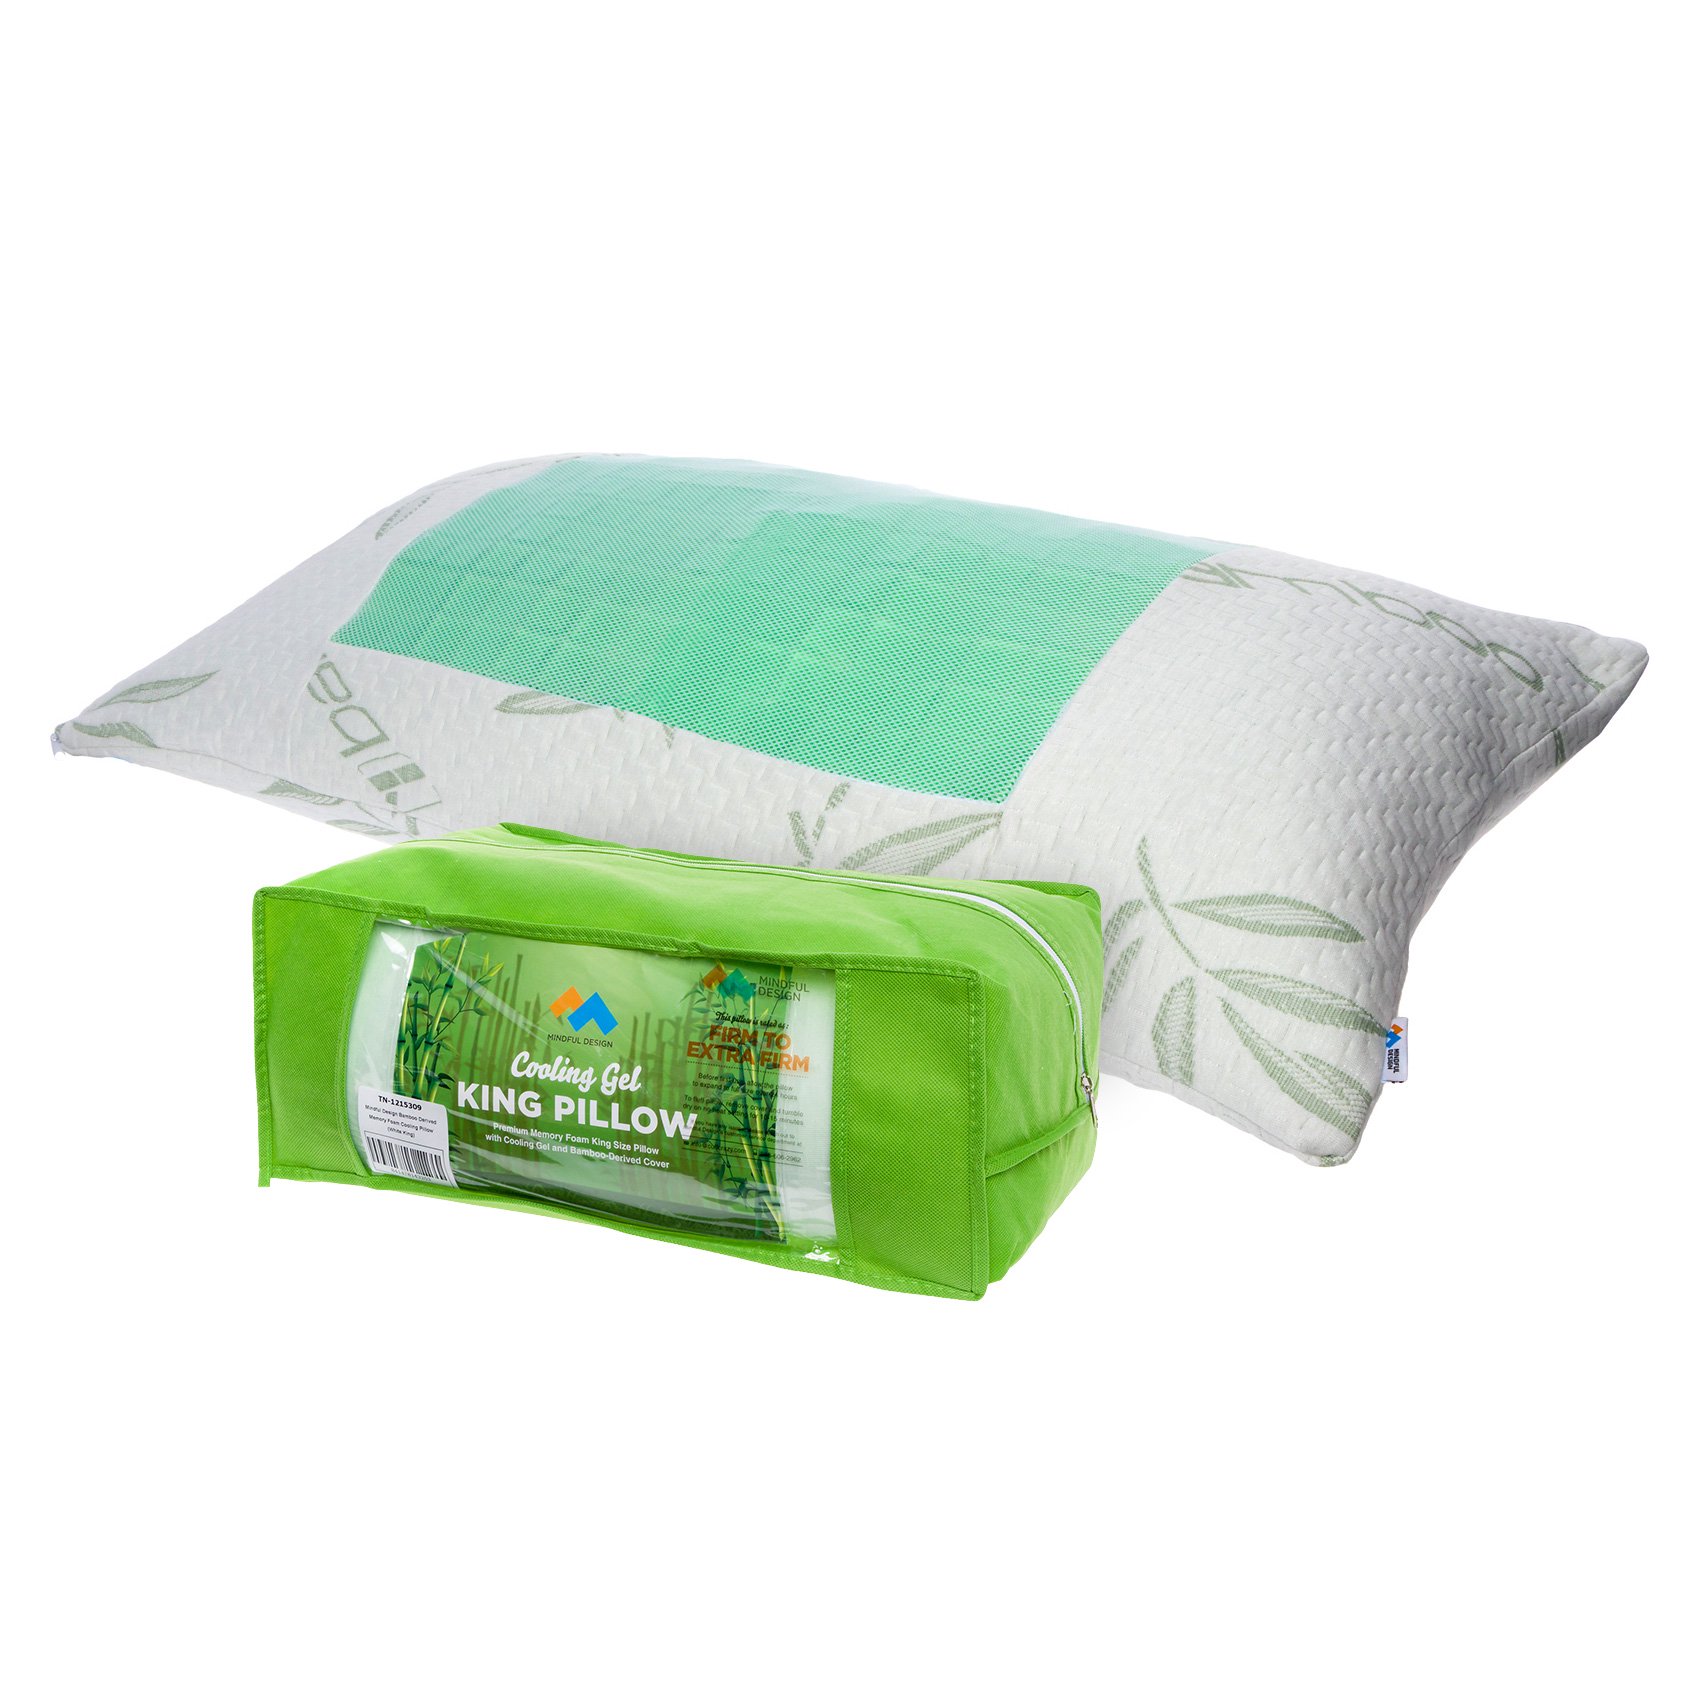 Photo 2 of Mindful Design Firm Memory Foam Pillow  Bamboo Derived Cover w Cooling Gel